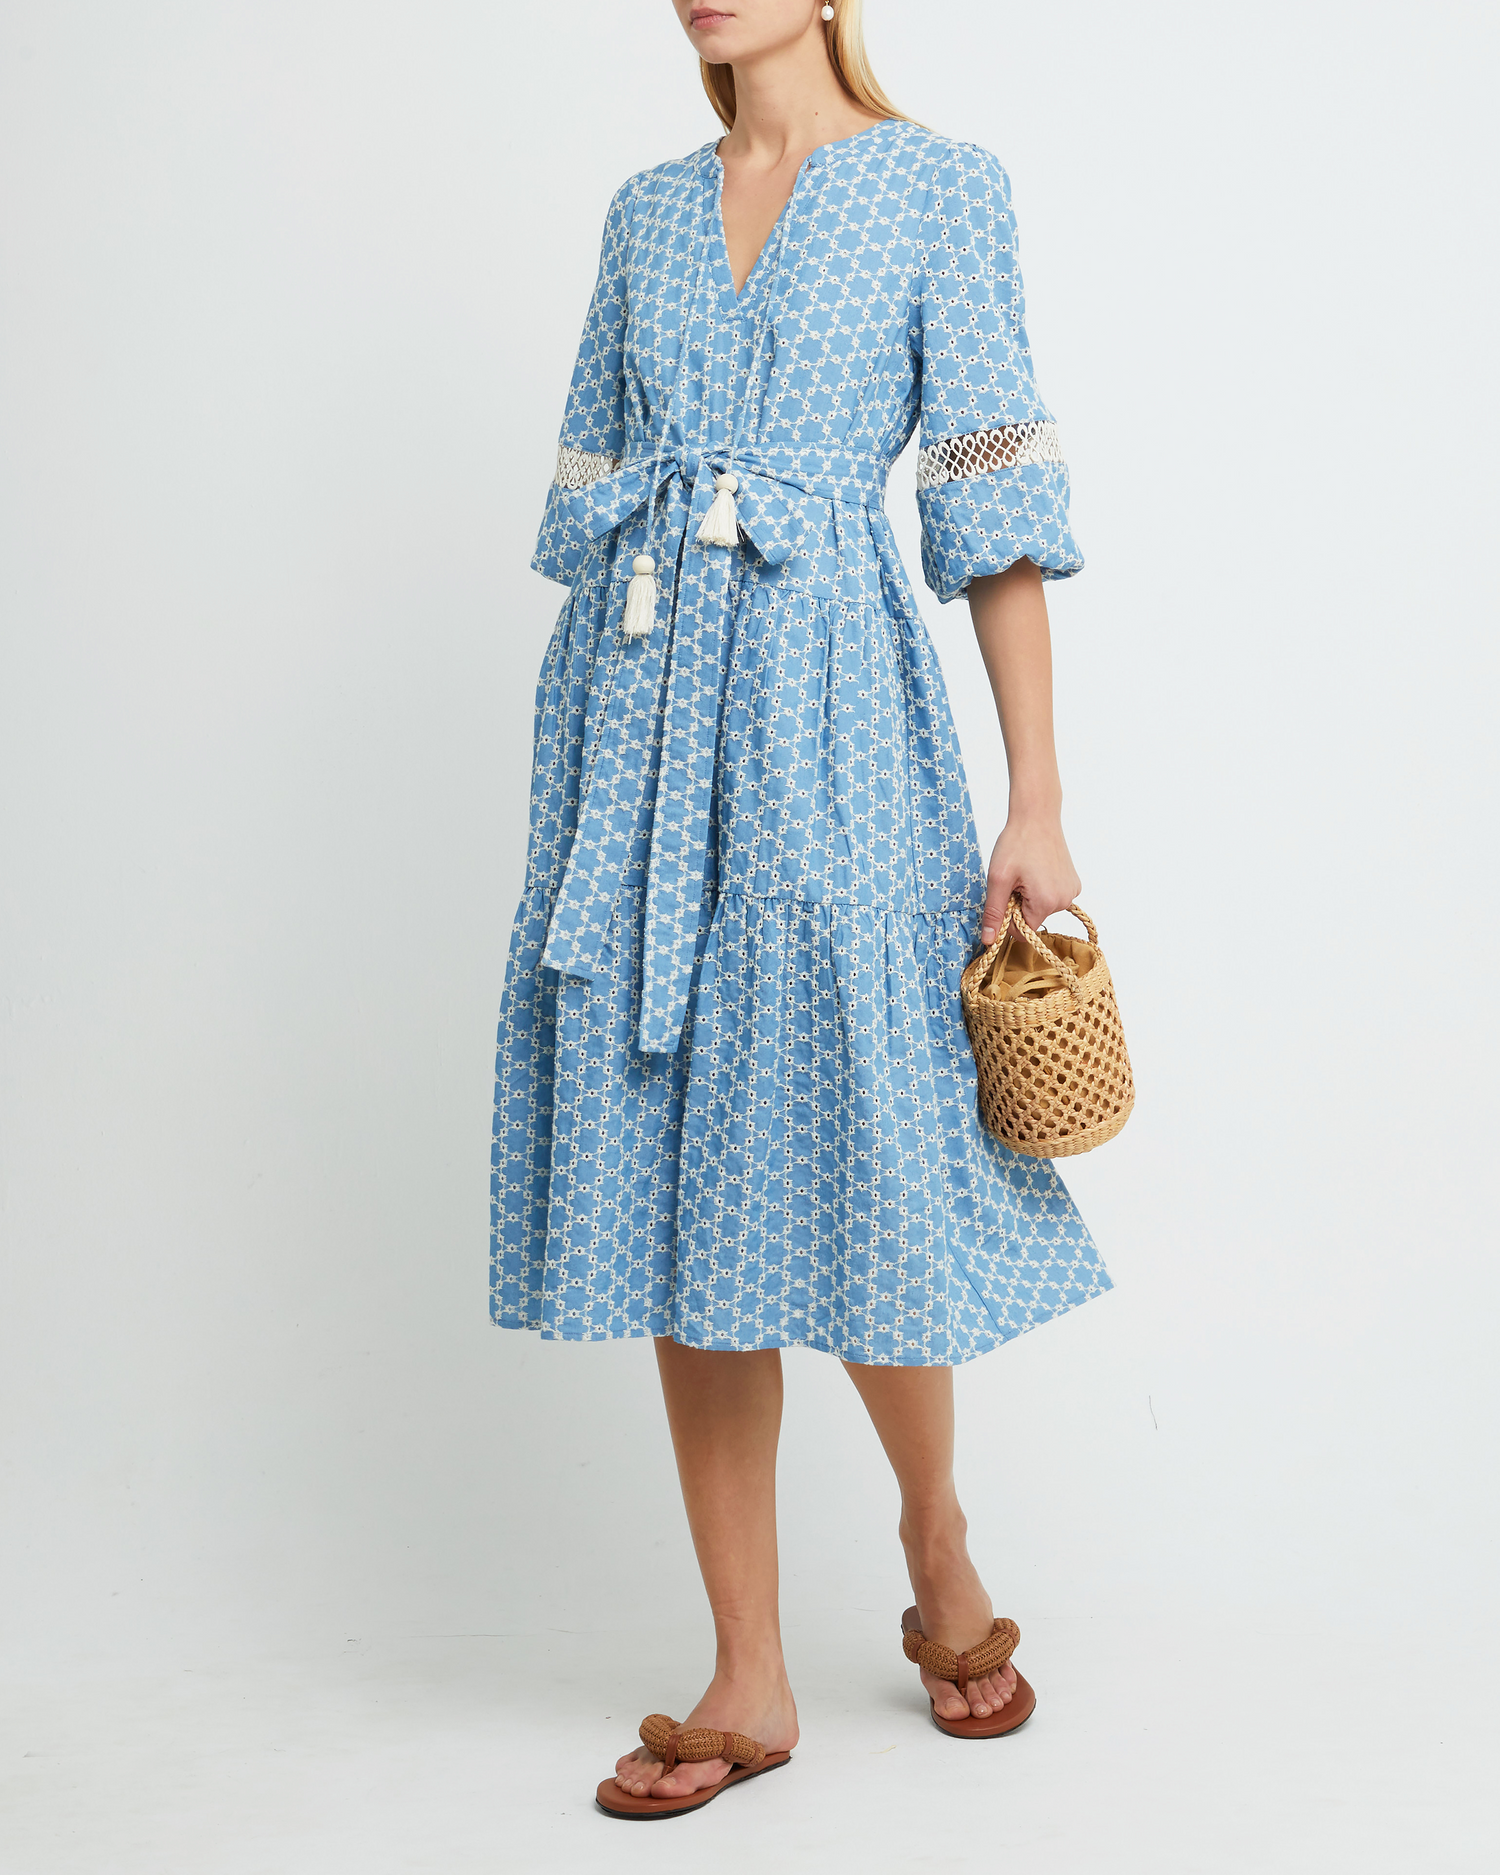 First image of Haven Dress, a blue midi dress, lace detail, eyelet, waist tie, bow, wrap dress, puff sleeves